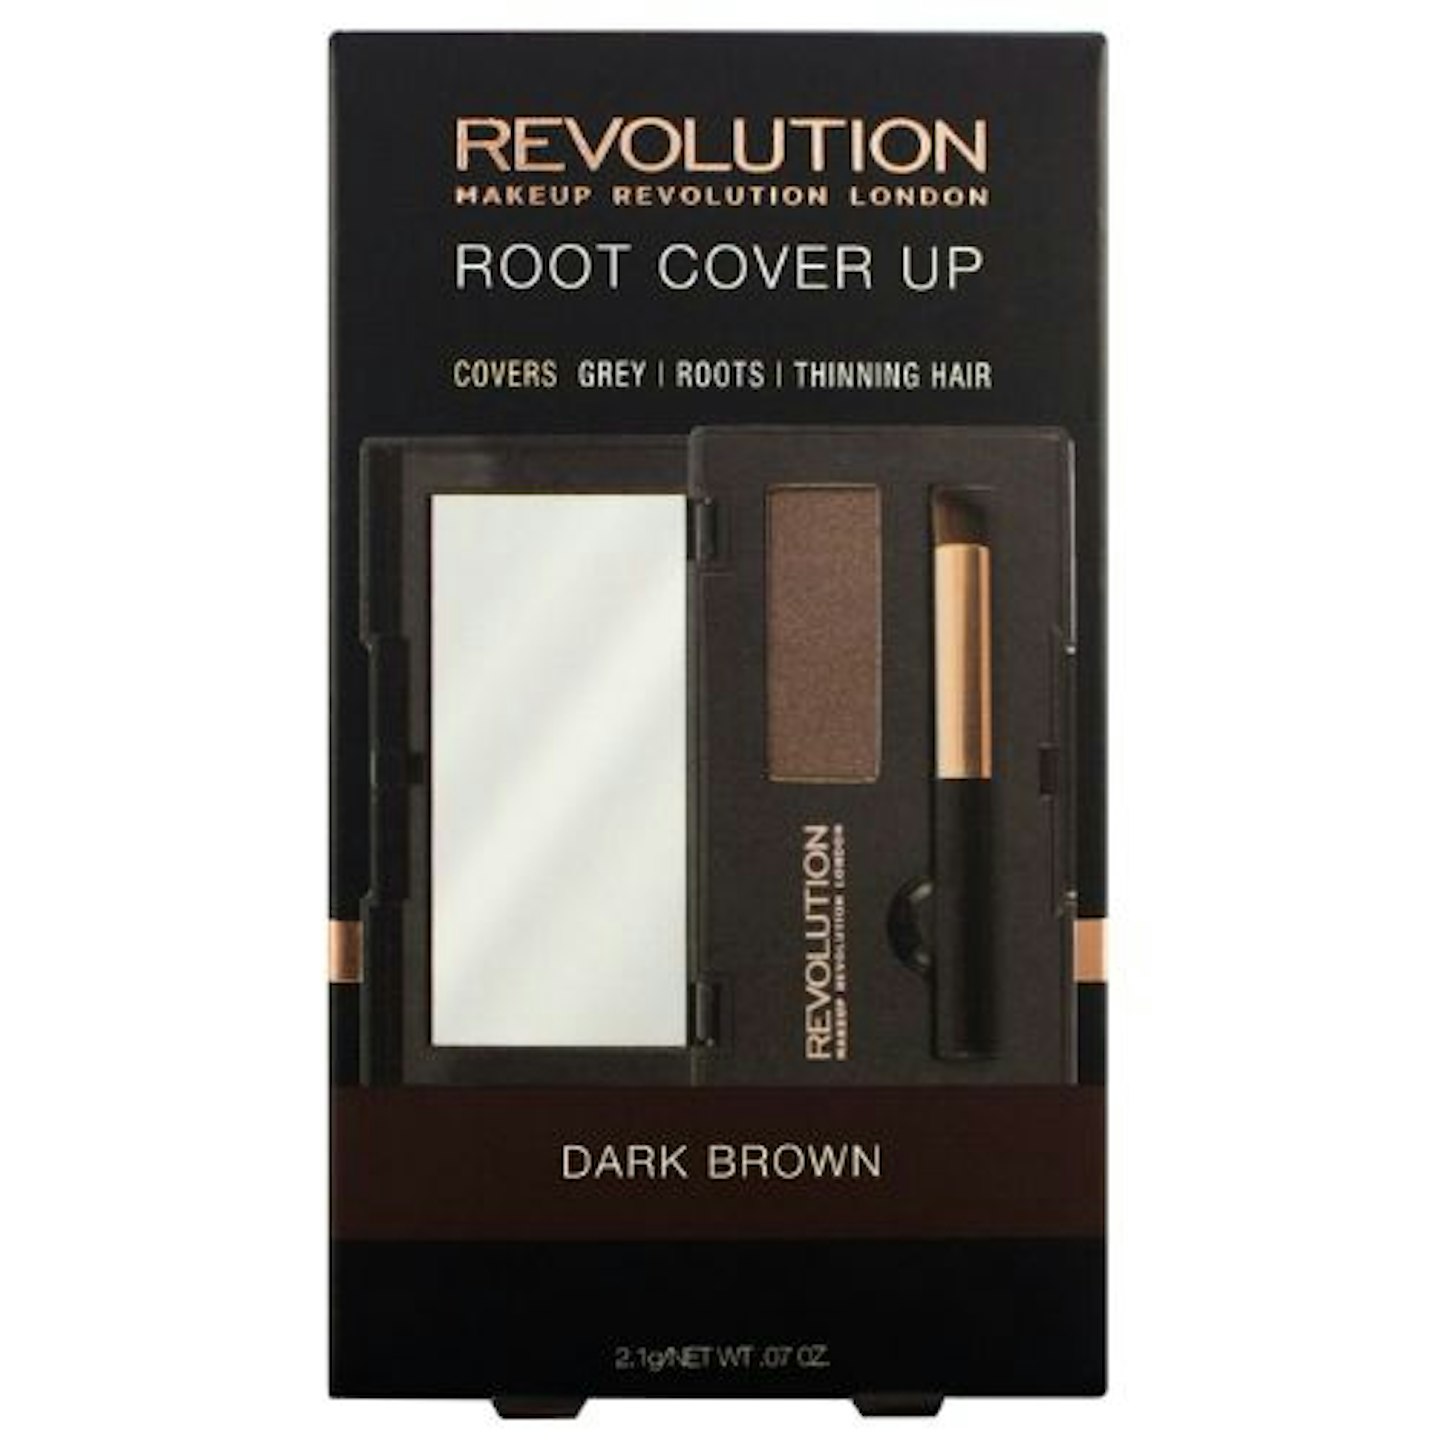 Revolution Root Cover Up Palette